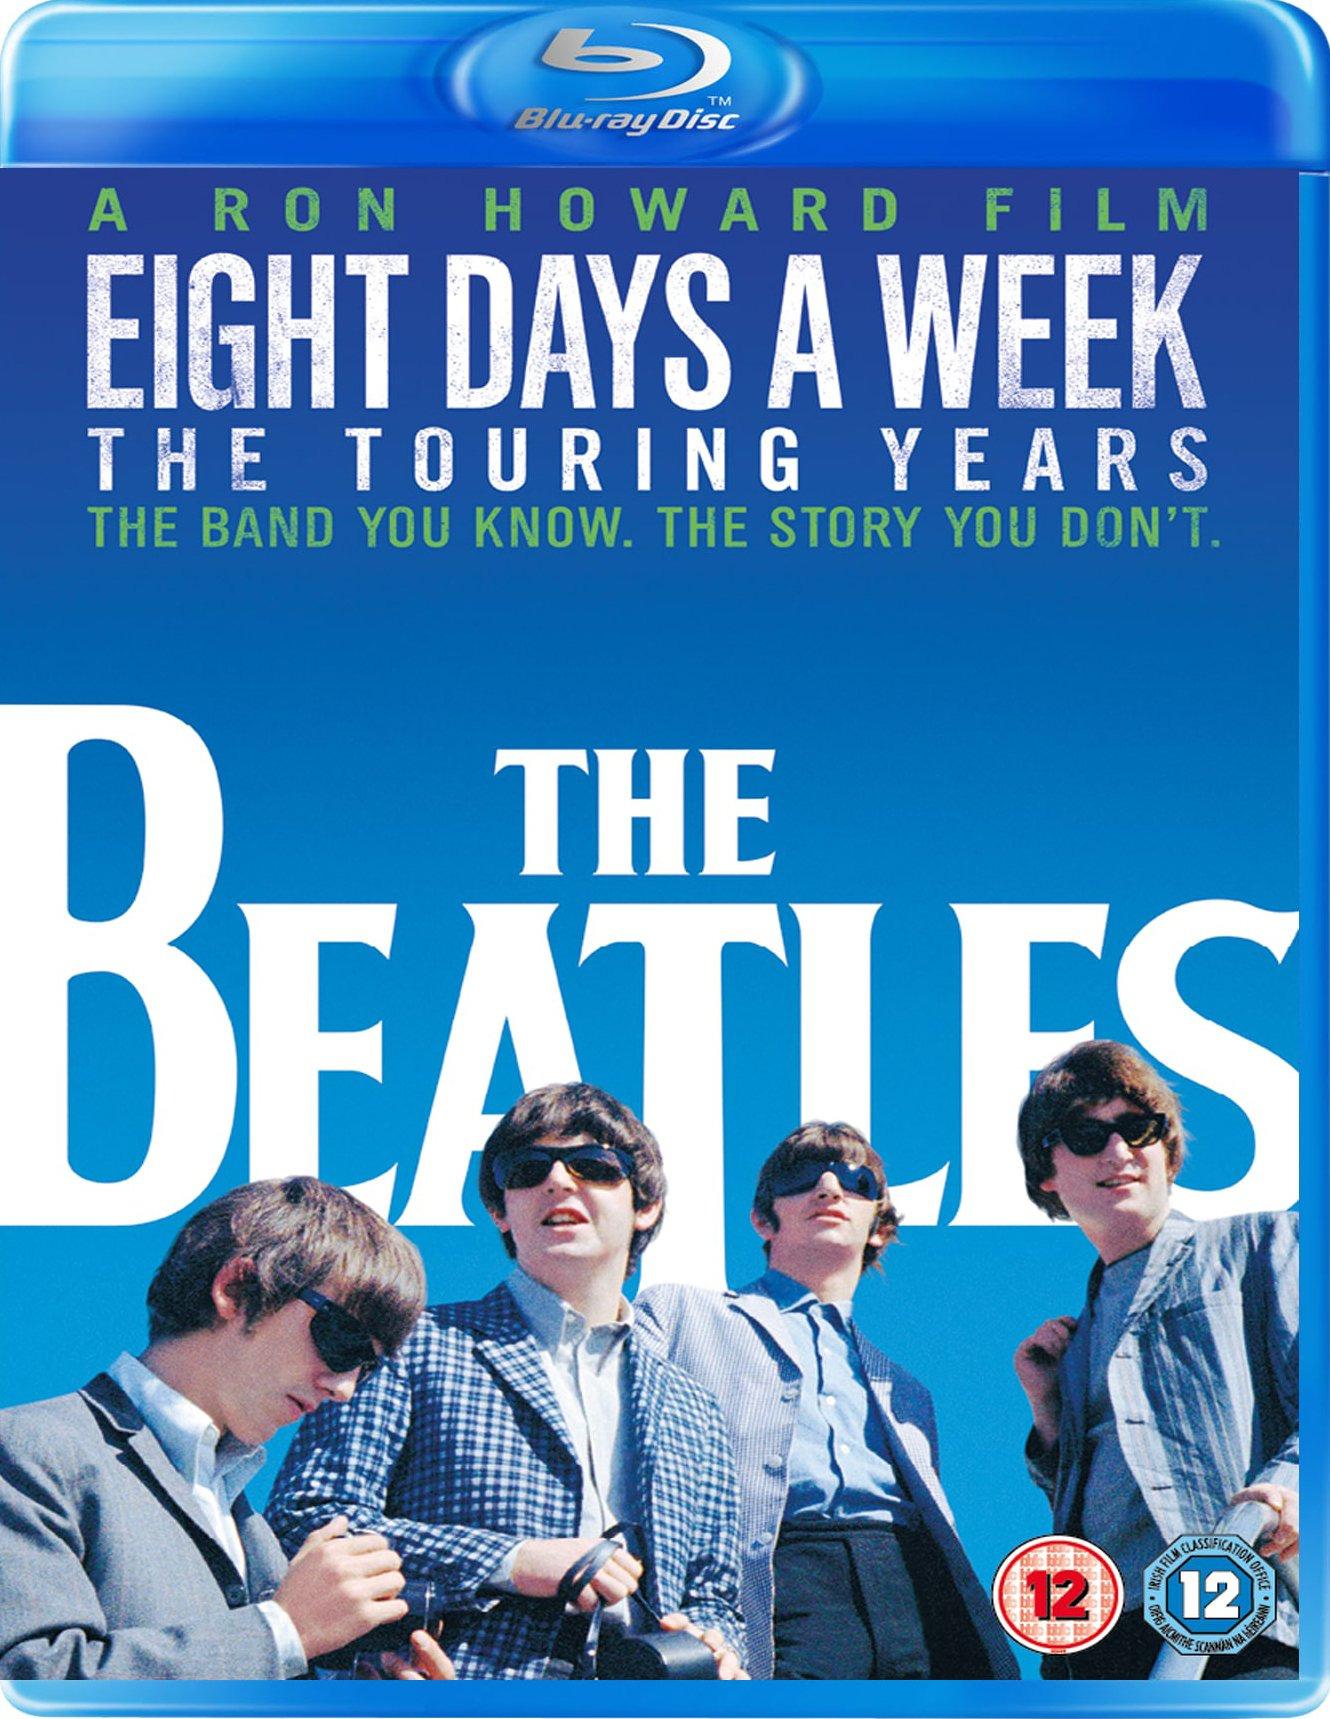 Beatles - Eight Days a Week The Touring Years